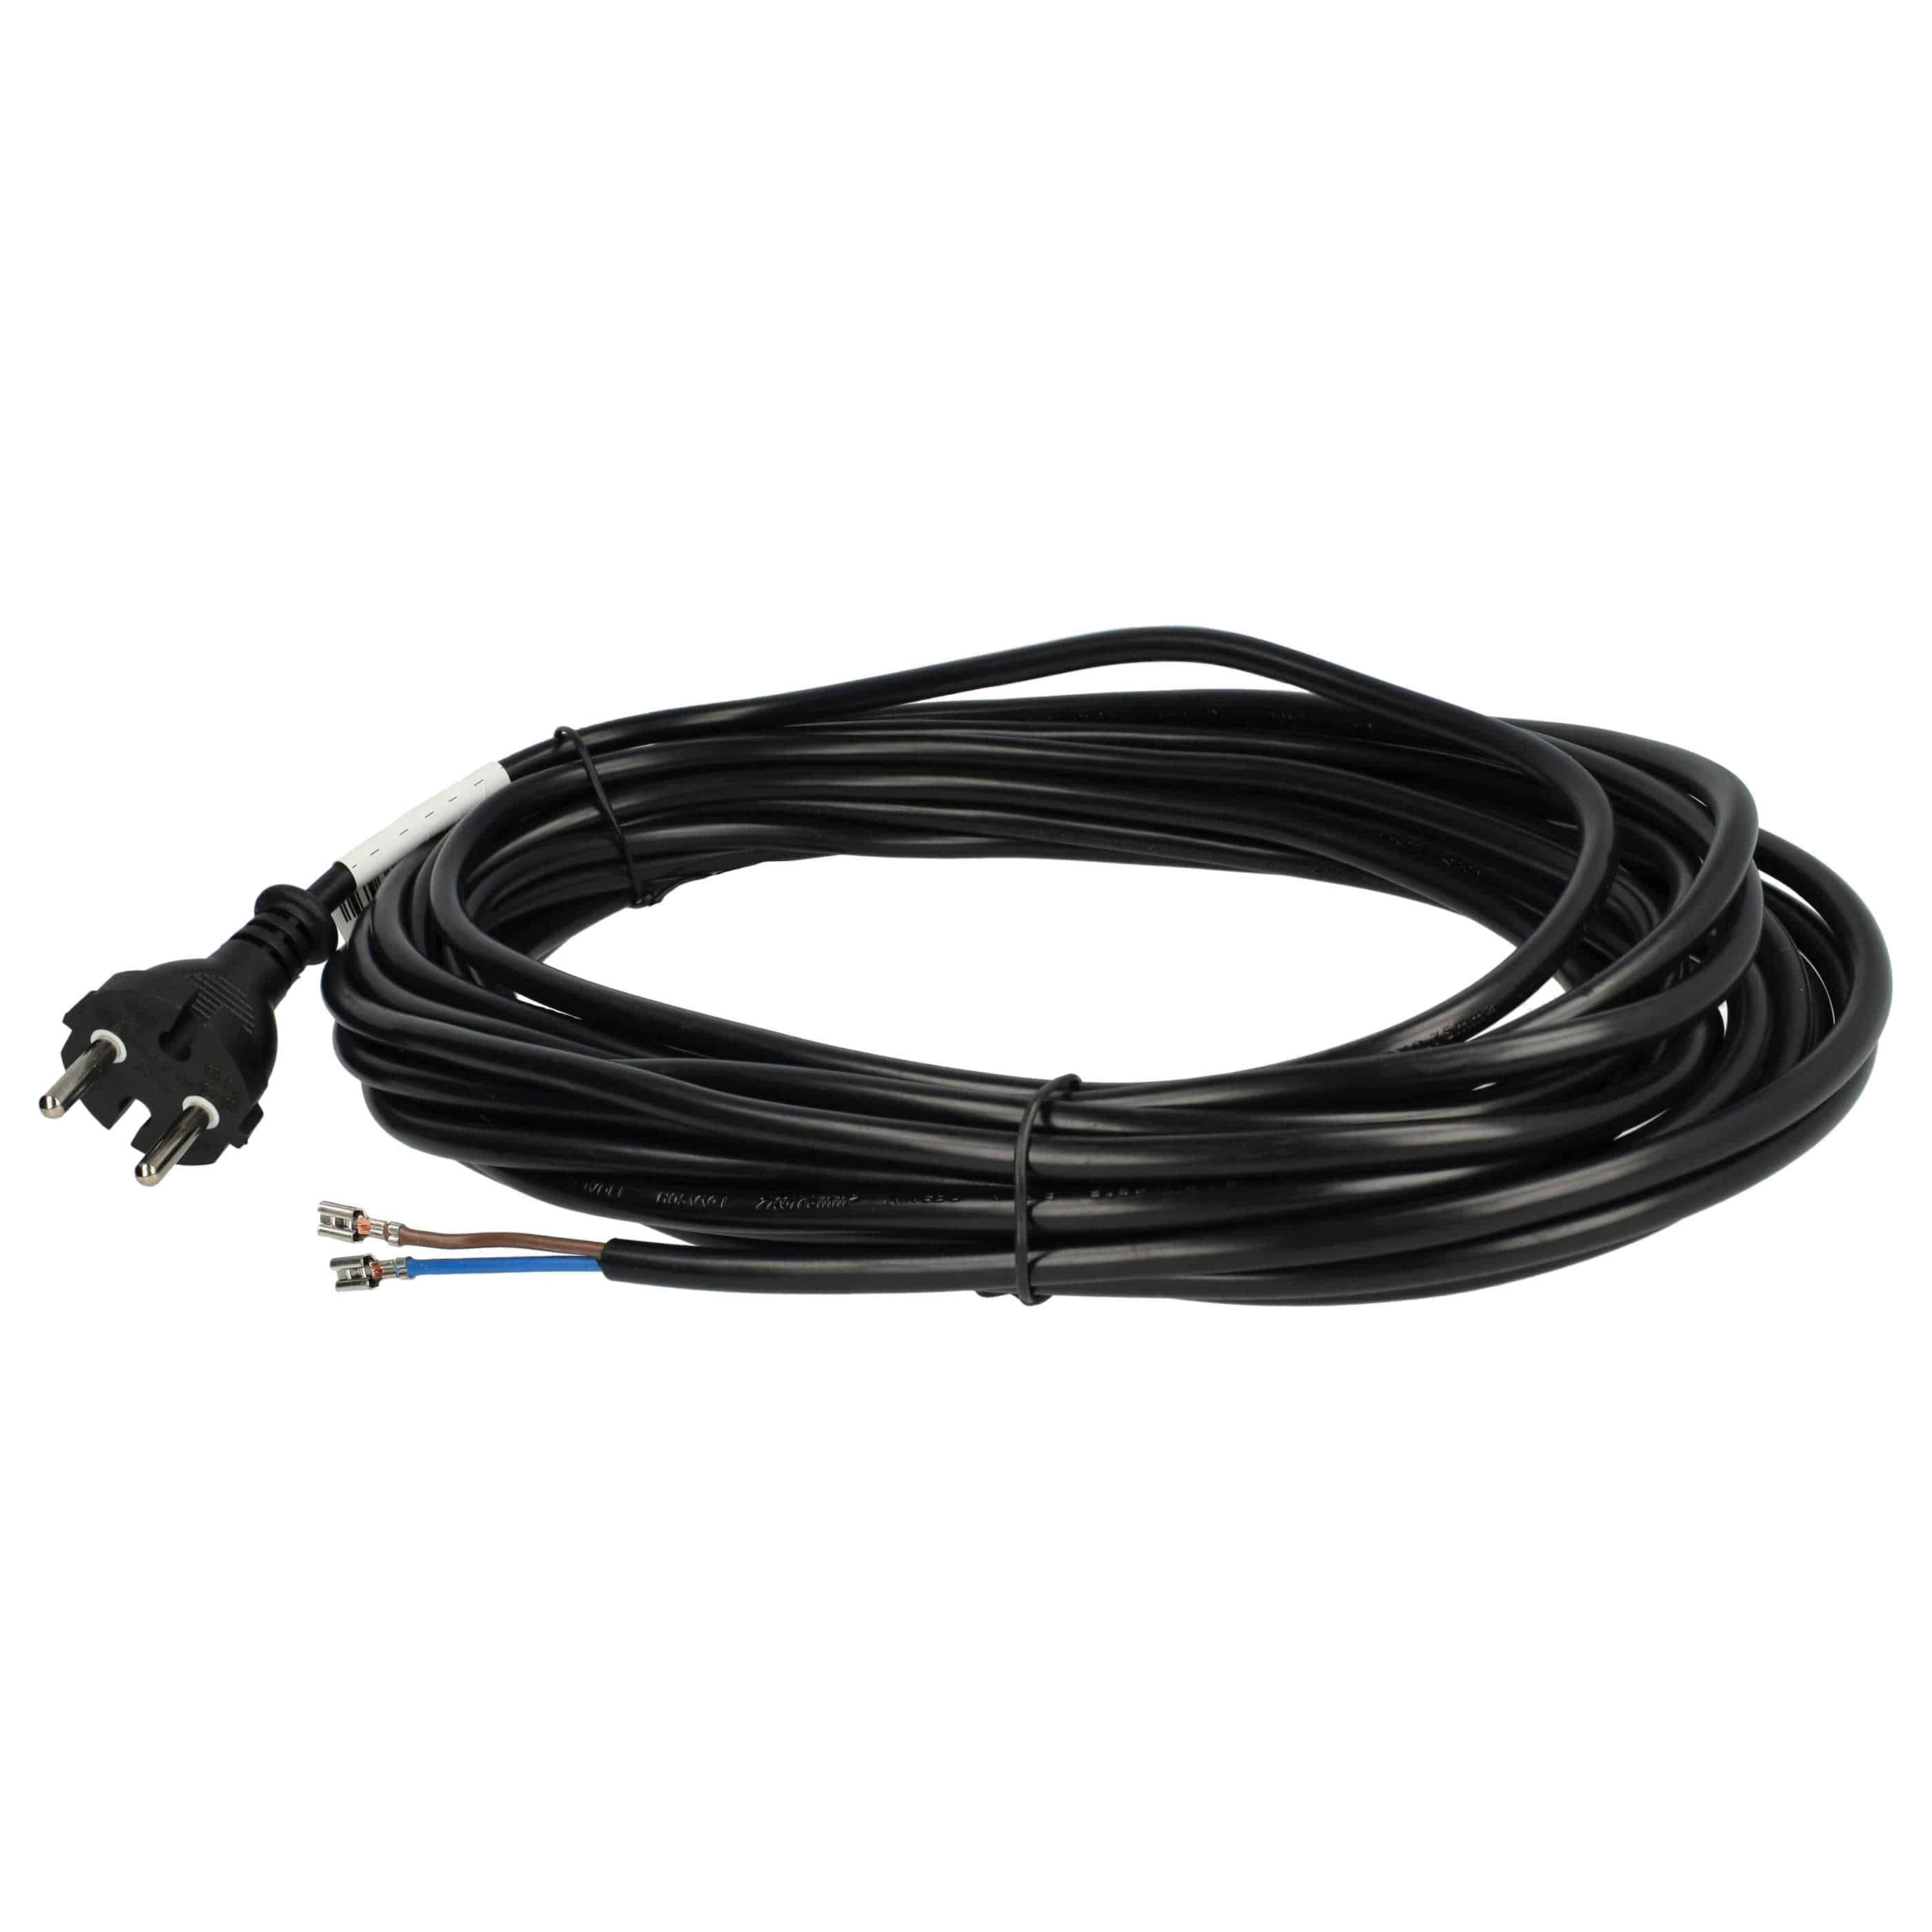 Power Cable replaces Sebo 7128SR, 5260DG for Thomas Vacuum Cleaner etc. - 10 m Cable 1000 W